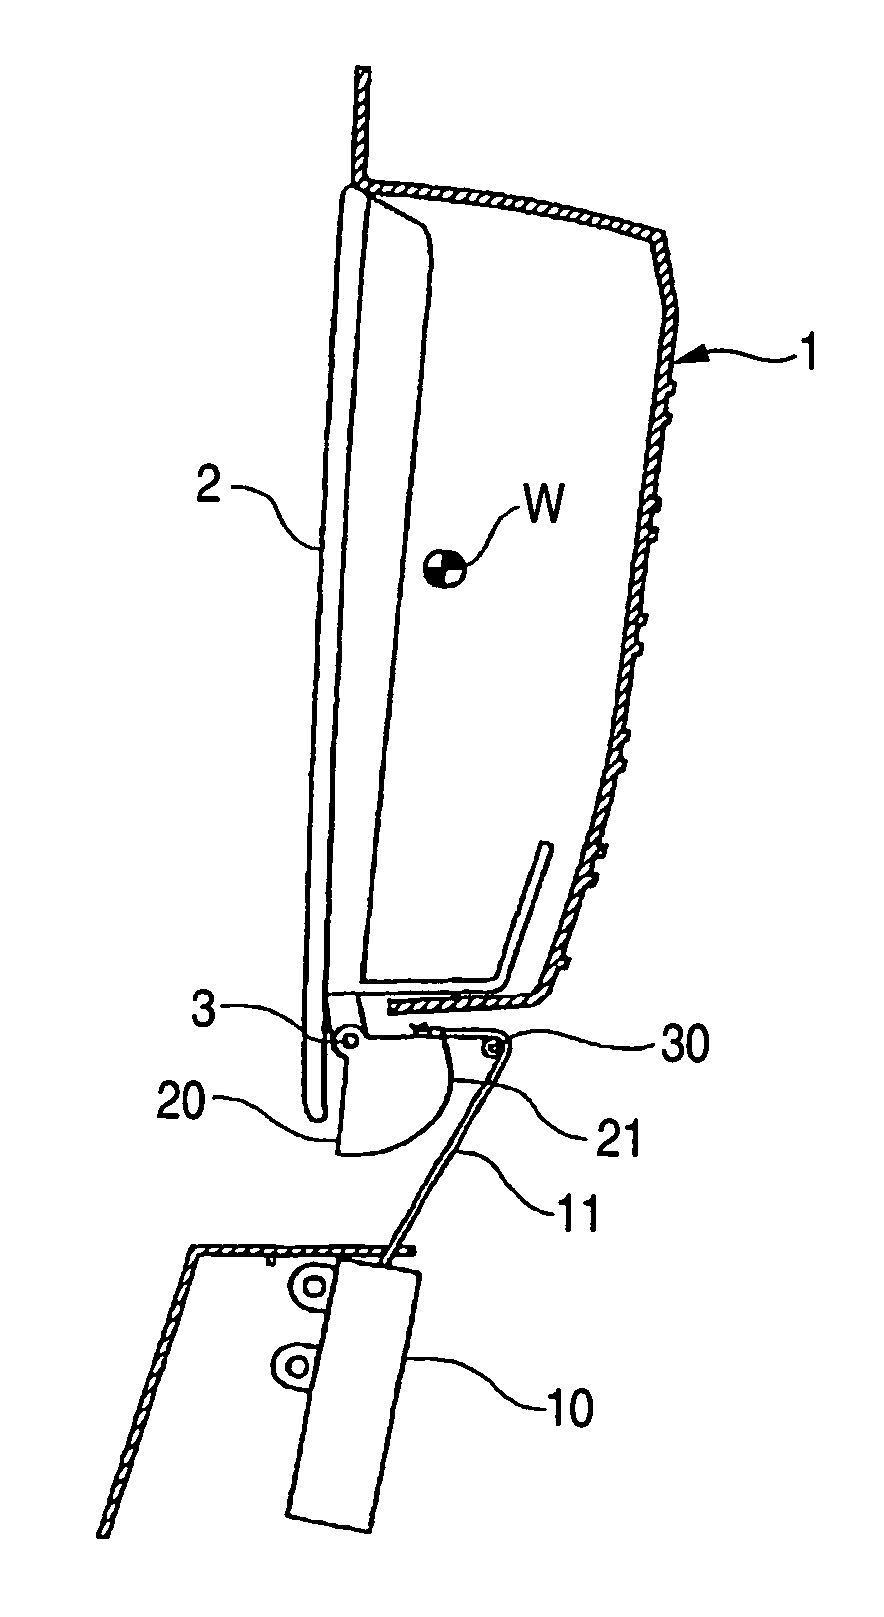 Storage apparatus for vehicle